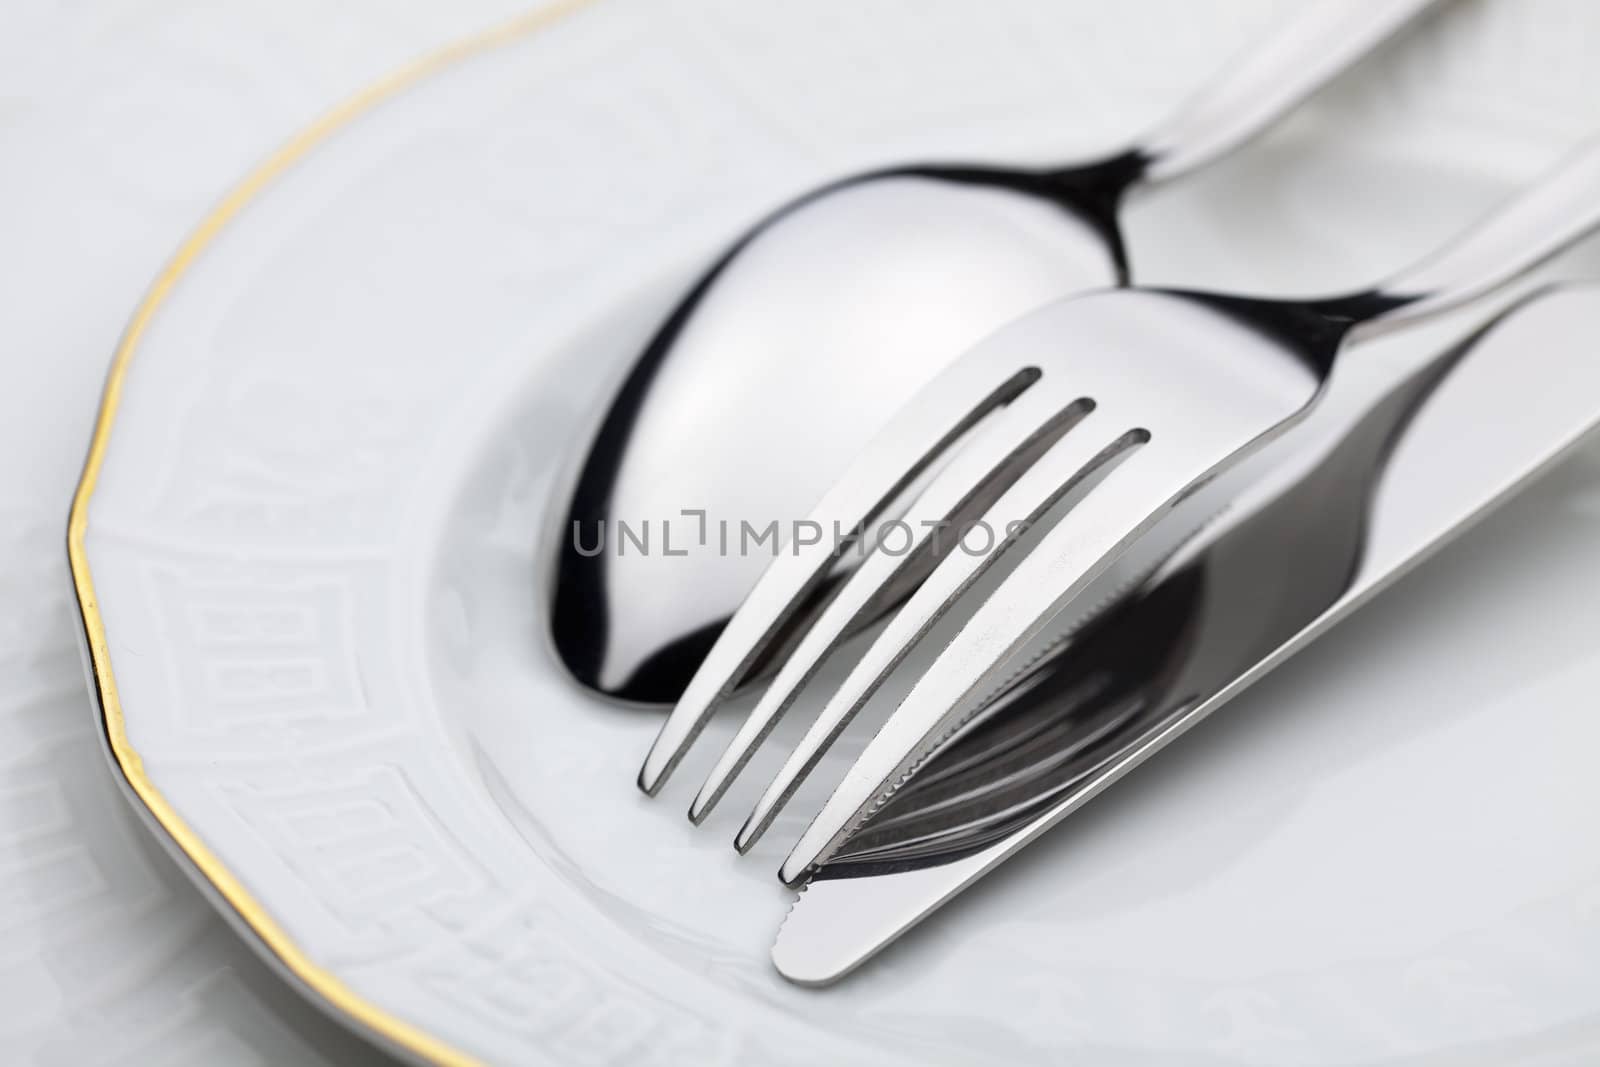 Knife, fork and spoon on a plate